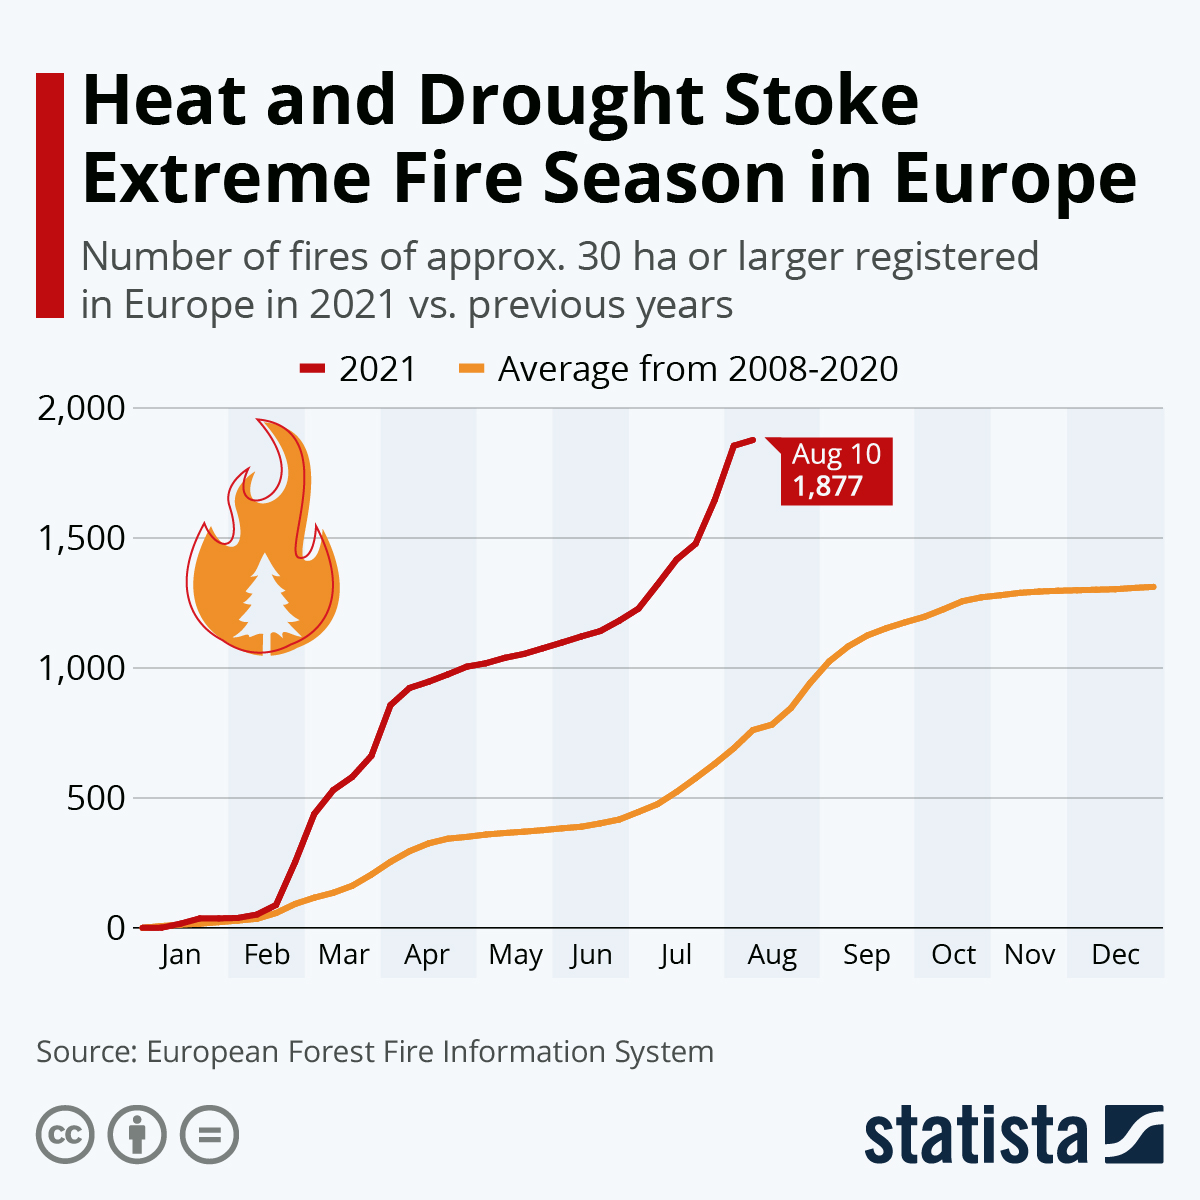 Heat and Drought Stoke Extreme Fire Season in Europe